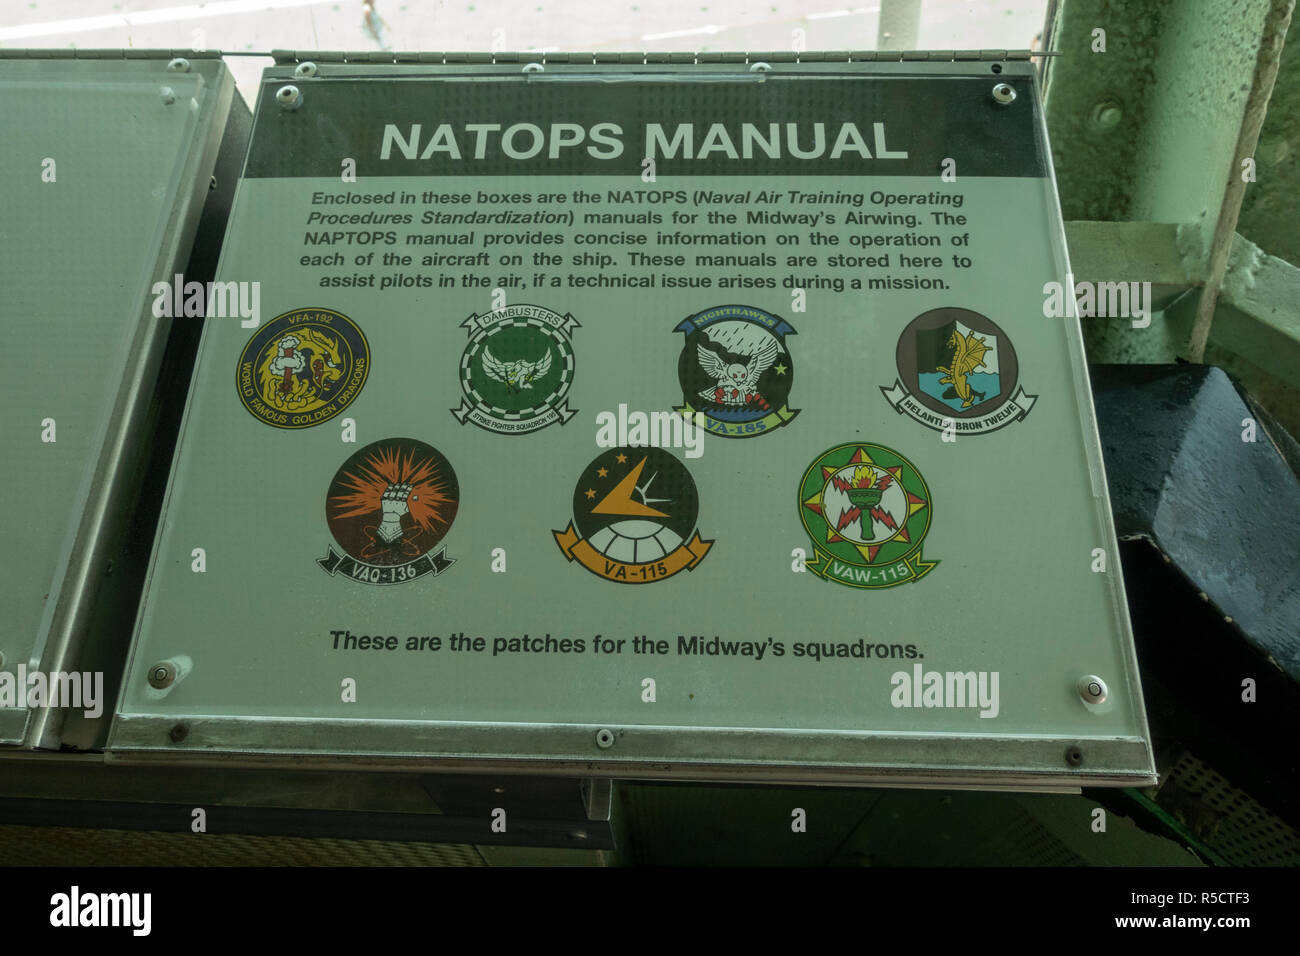 Die NATOPS Handbuch Information Board (Naval Air Training Operating Procedures) mit Midway squadron Patches, USS Midway Museum, San Diego, CA, USA. Stockfoto